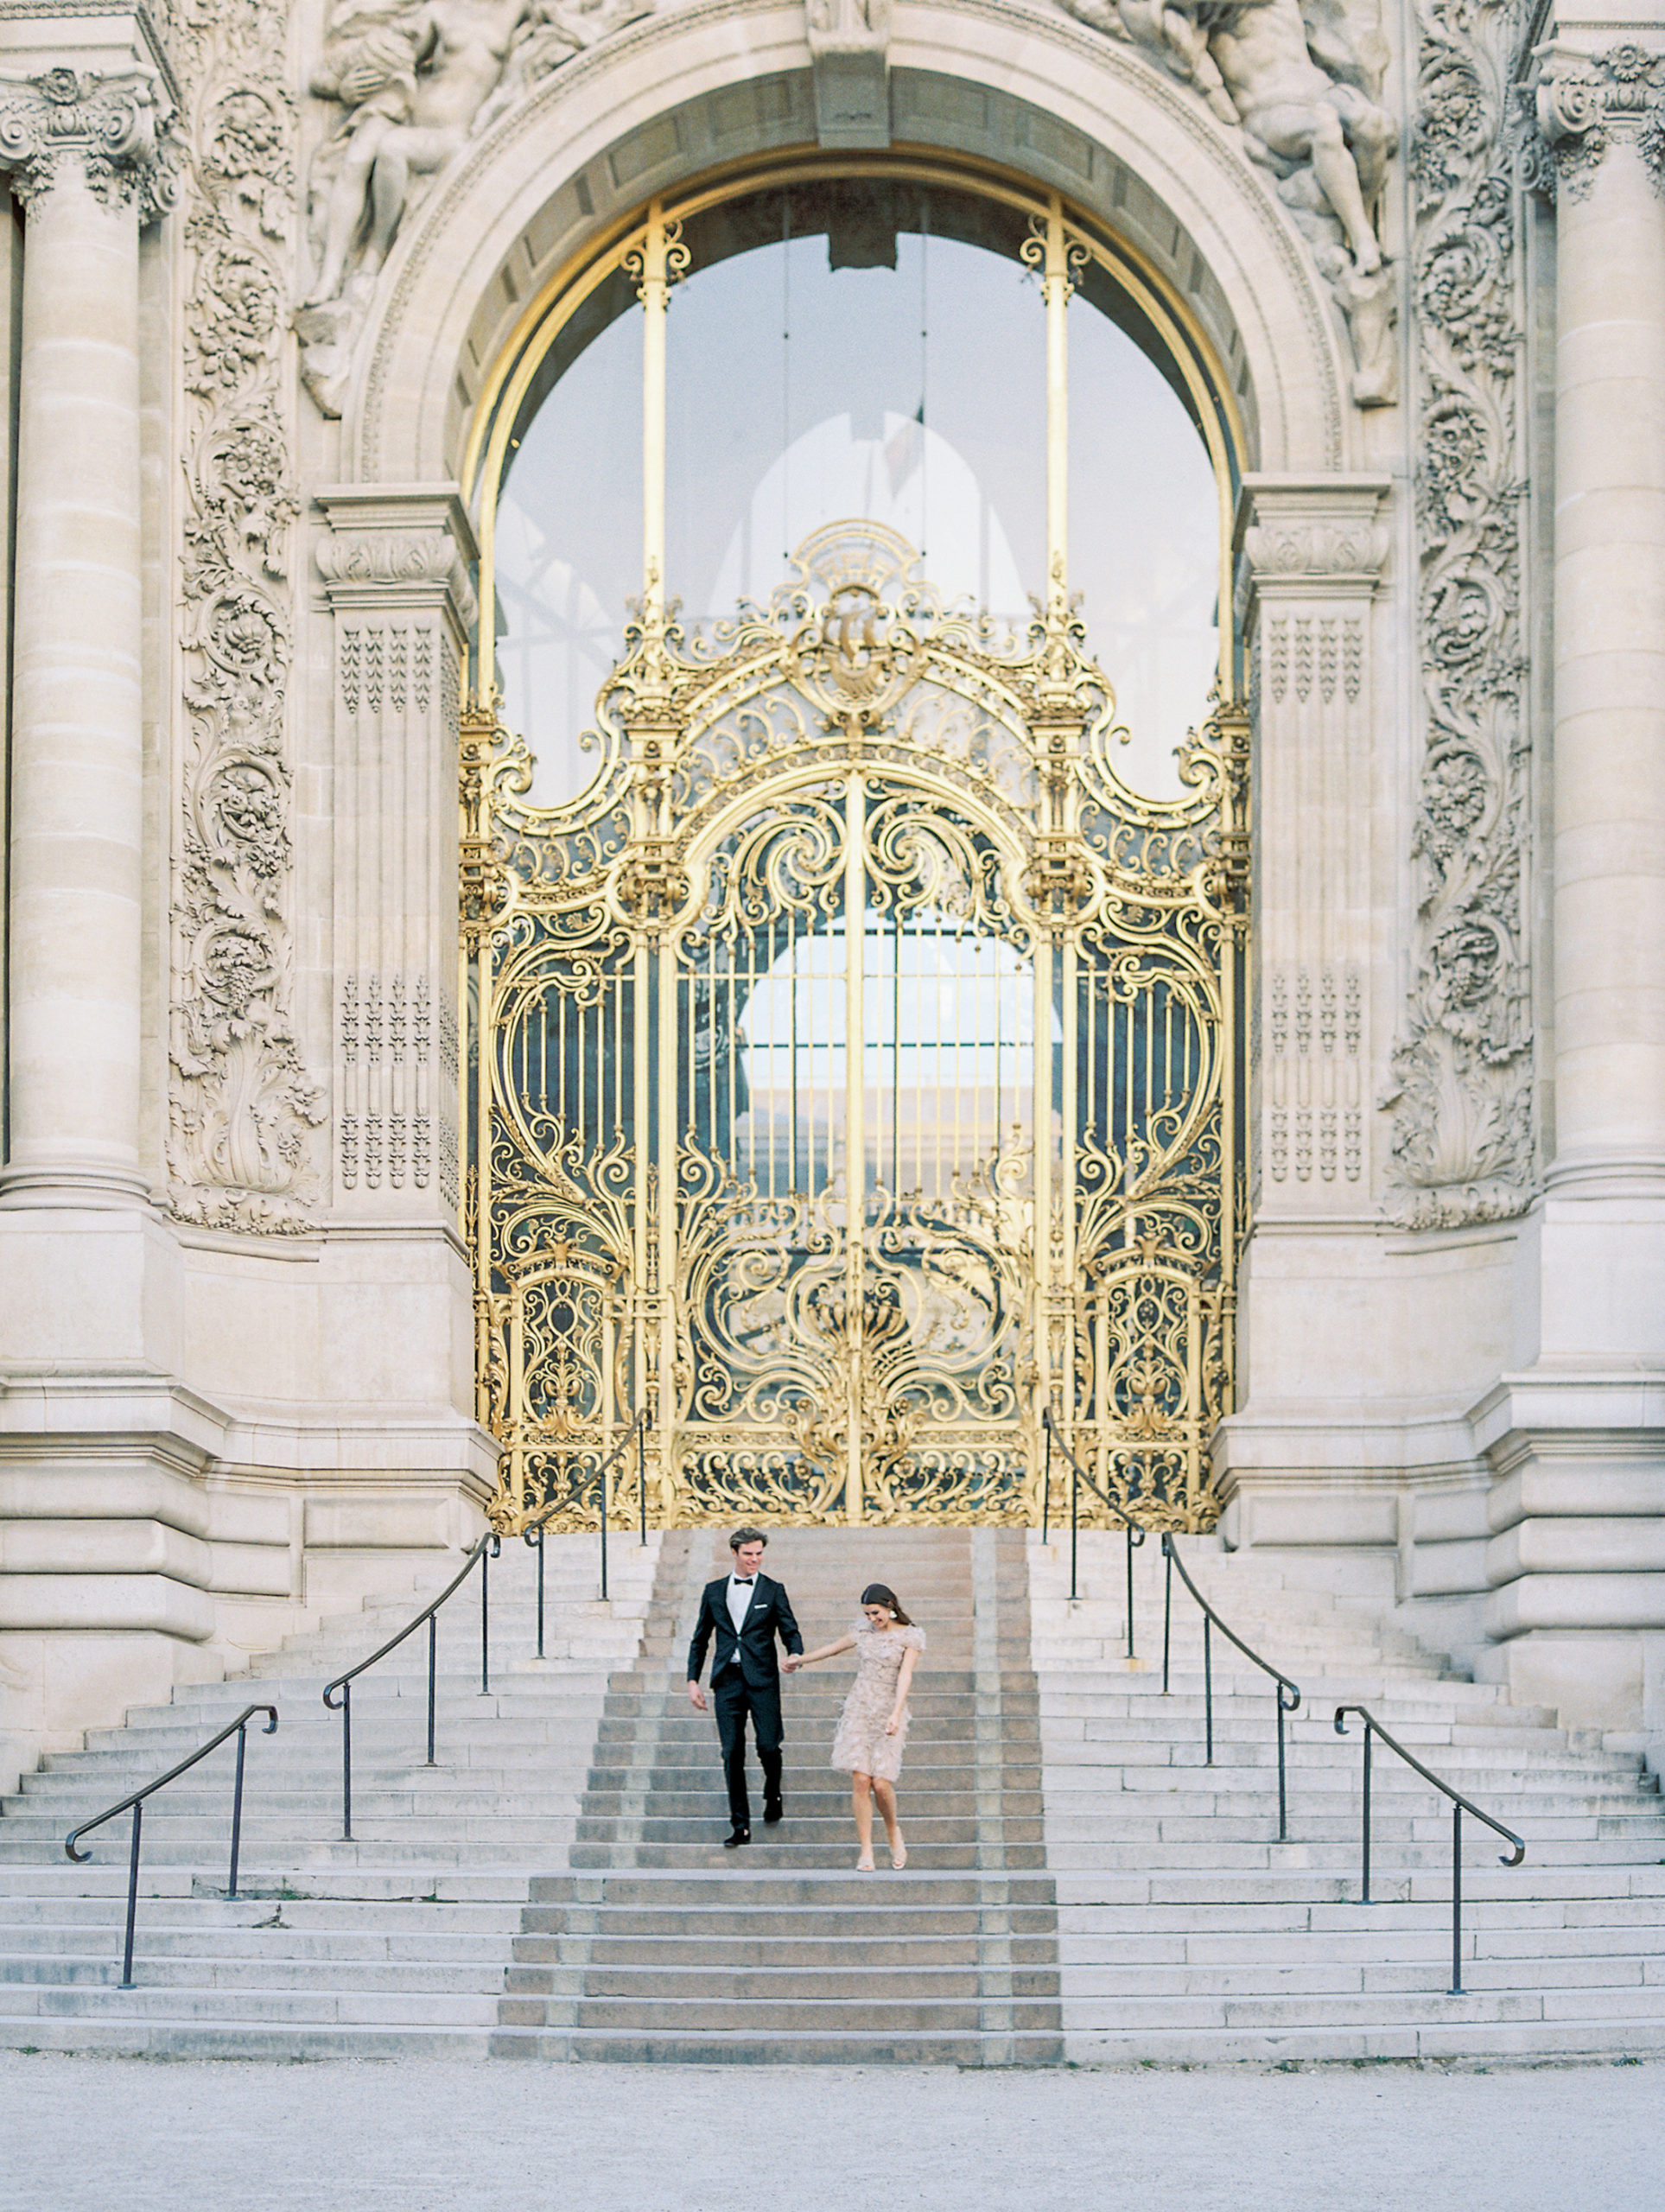 Couple holding hands walking down stairs in front of golden gates for Sunset Paris Engagement  